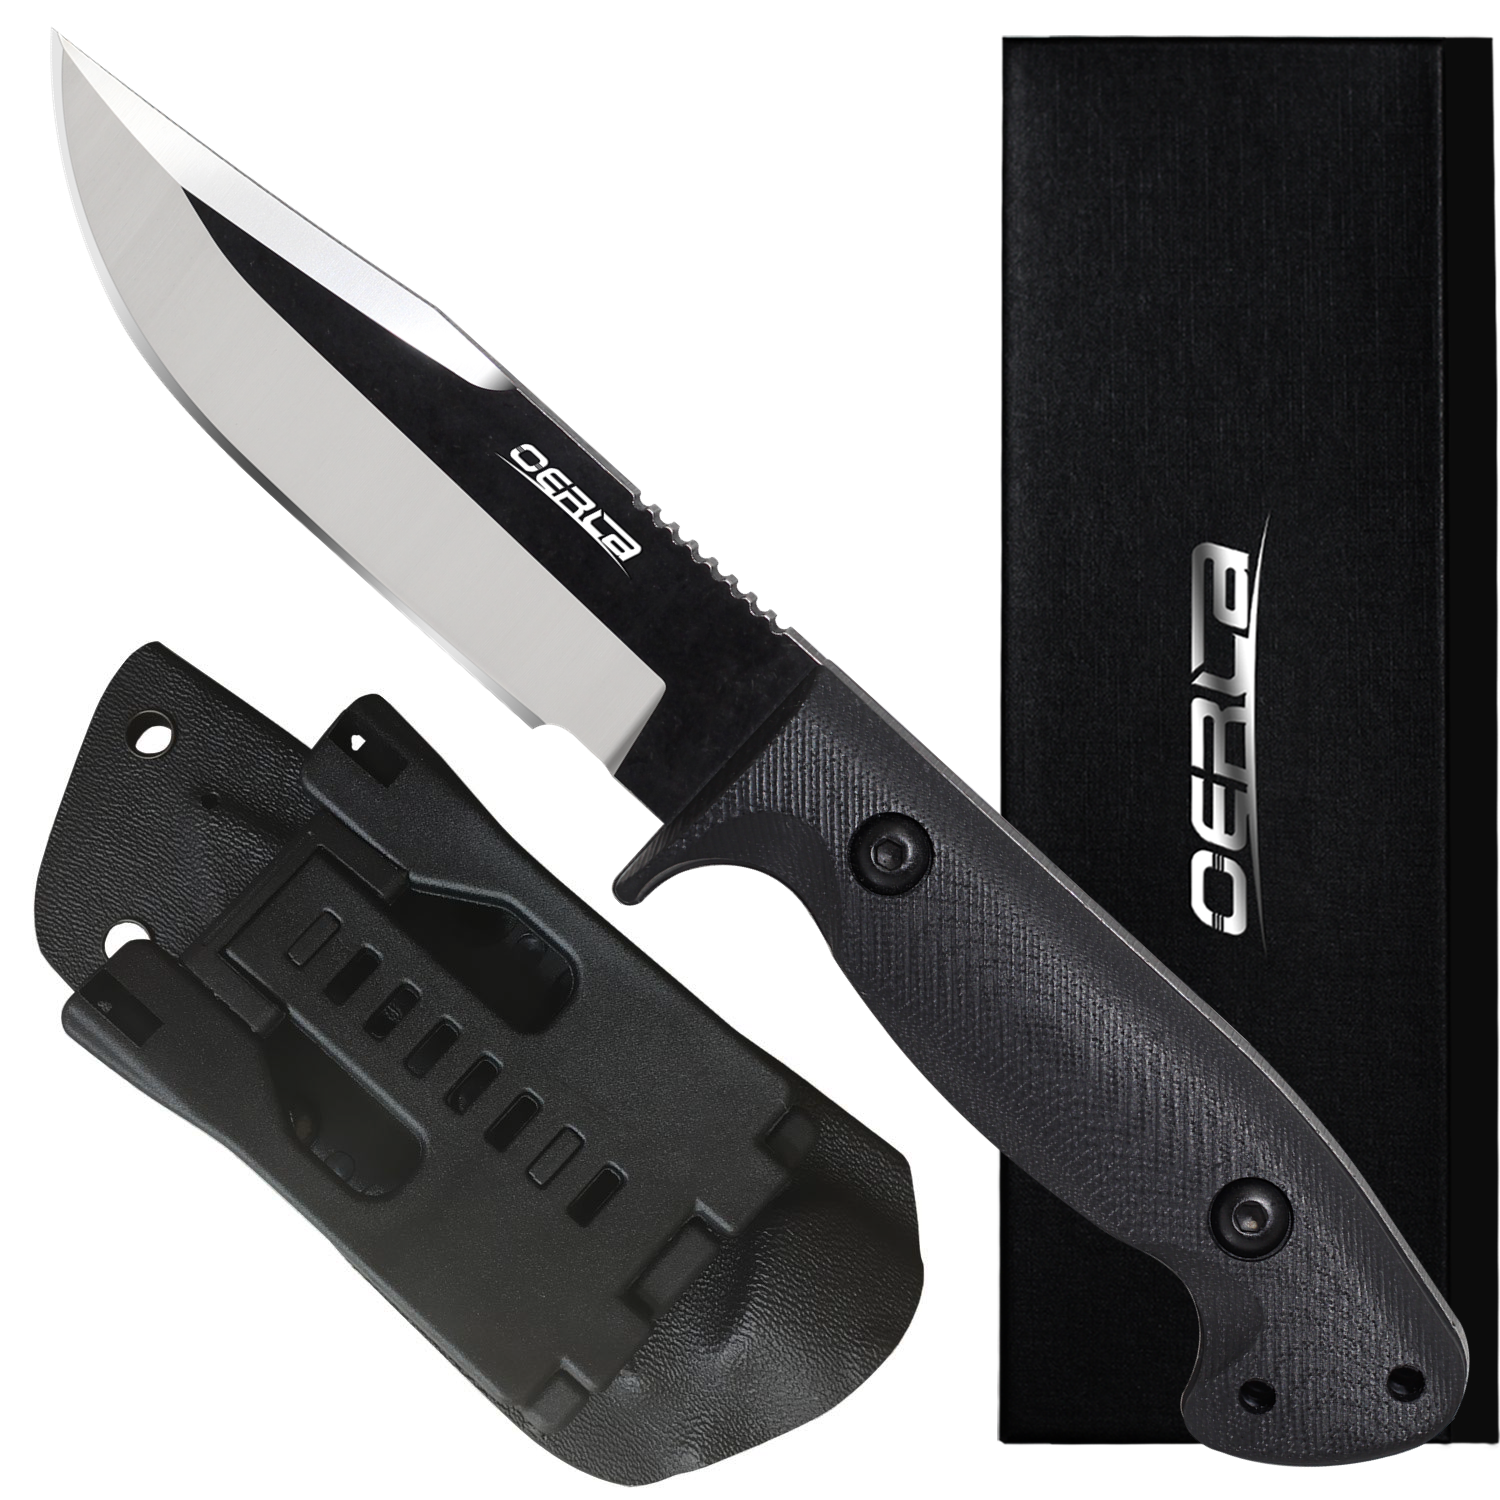 Oerla Olk-033rd Outdoor Duty Fixed Blade Knife With G10 Handle And Kydex Sheath